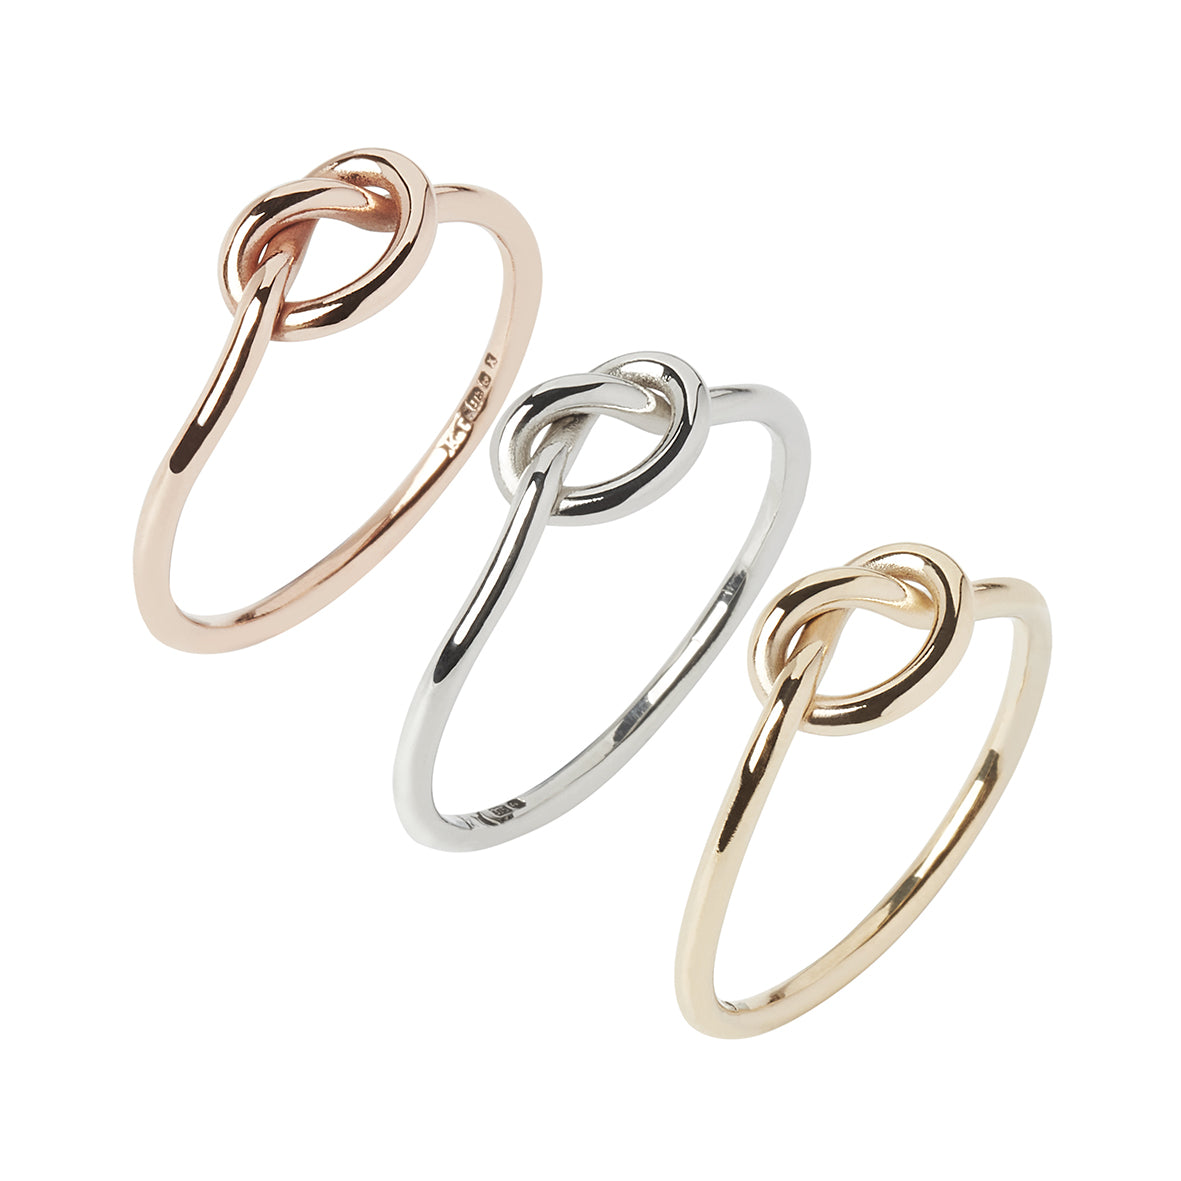 A rose gold, white gold and yellow gold promise proposal love knot rings made wire with hallmarks. Handcrafted rings made in Kirsty Taylor Jewellery Corbridge studio